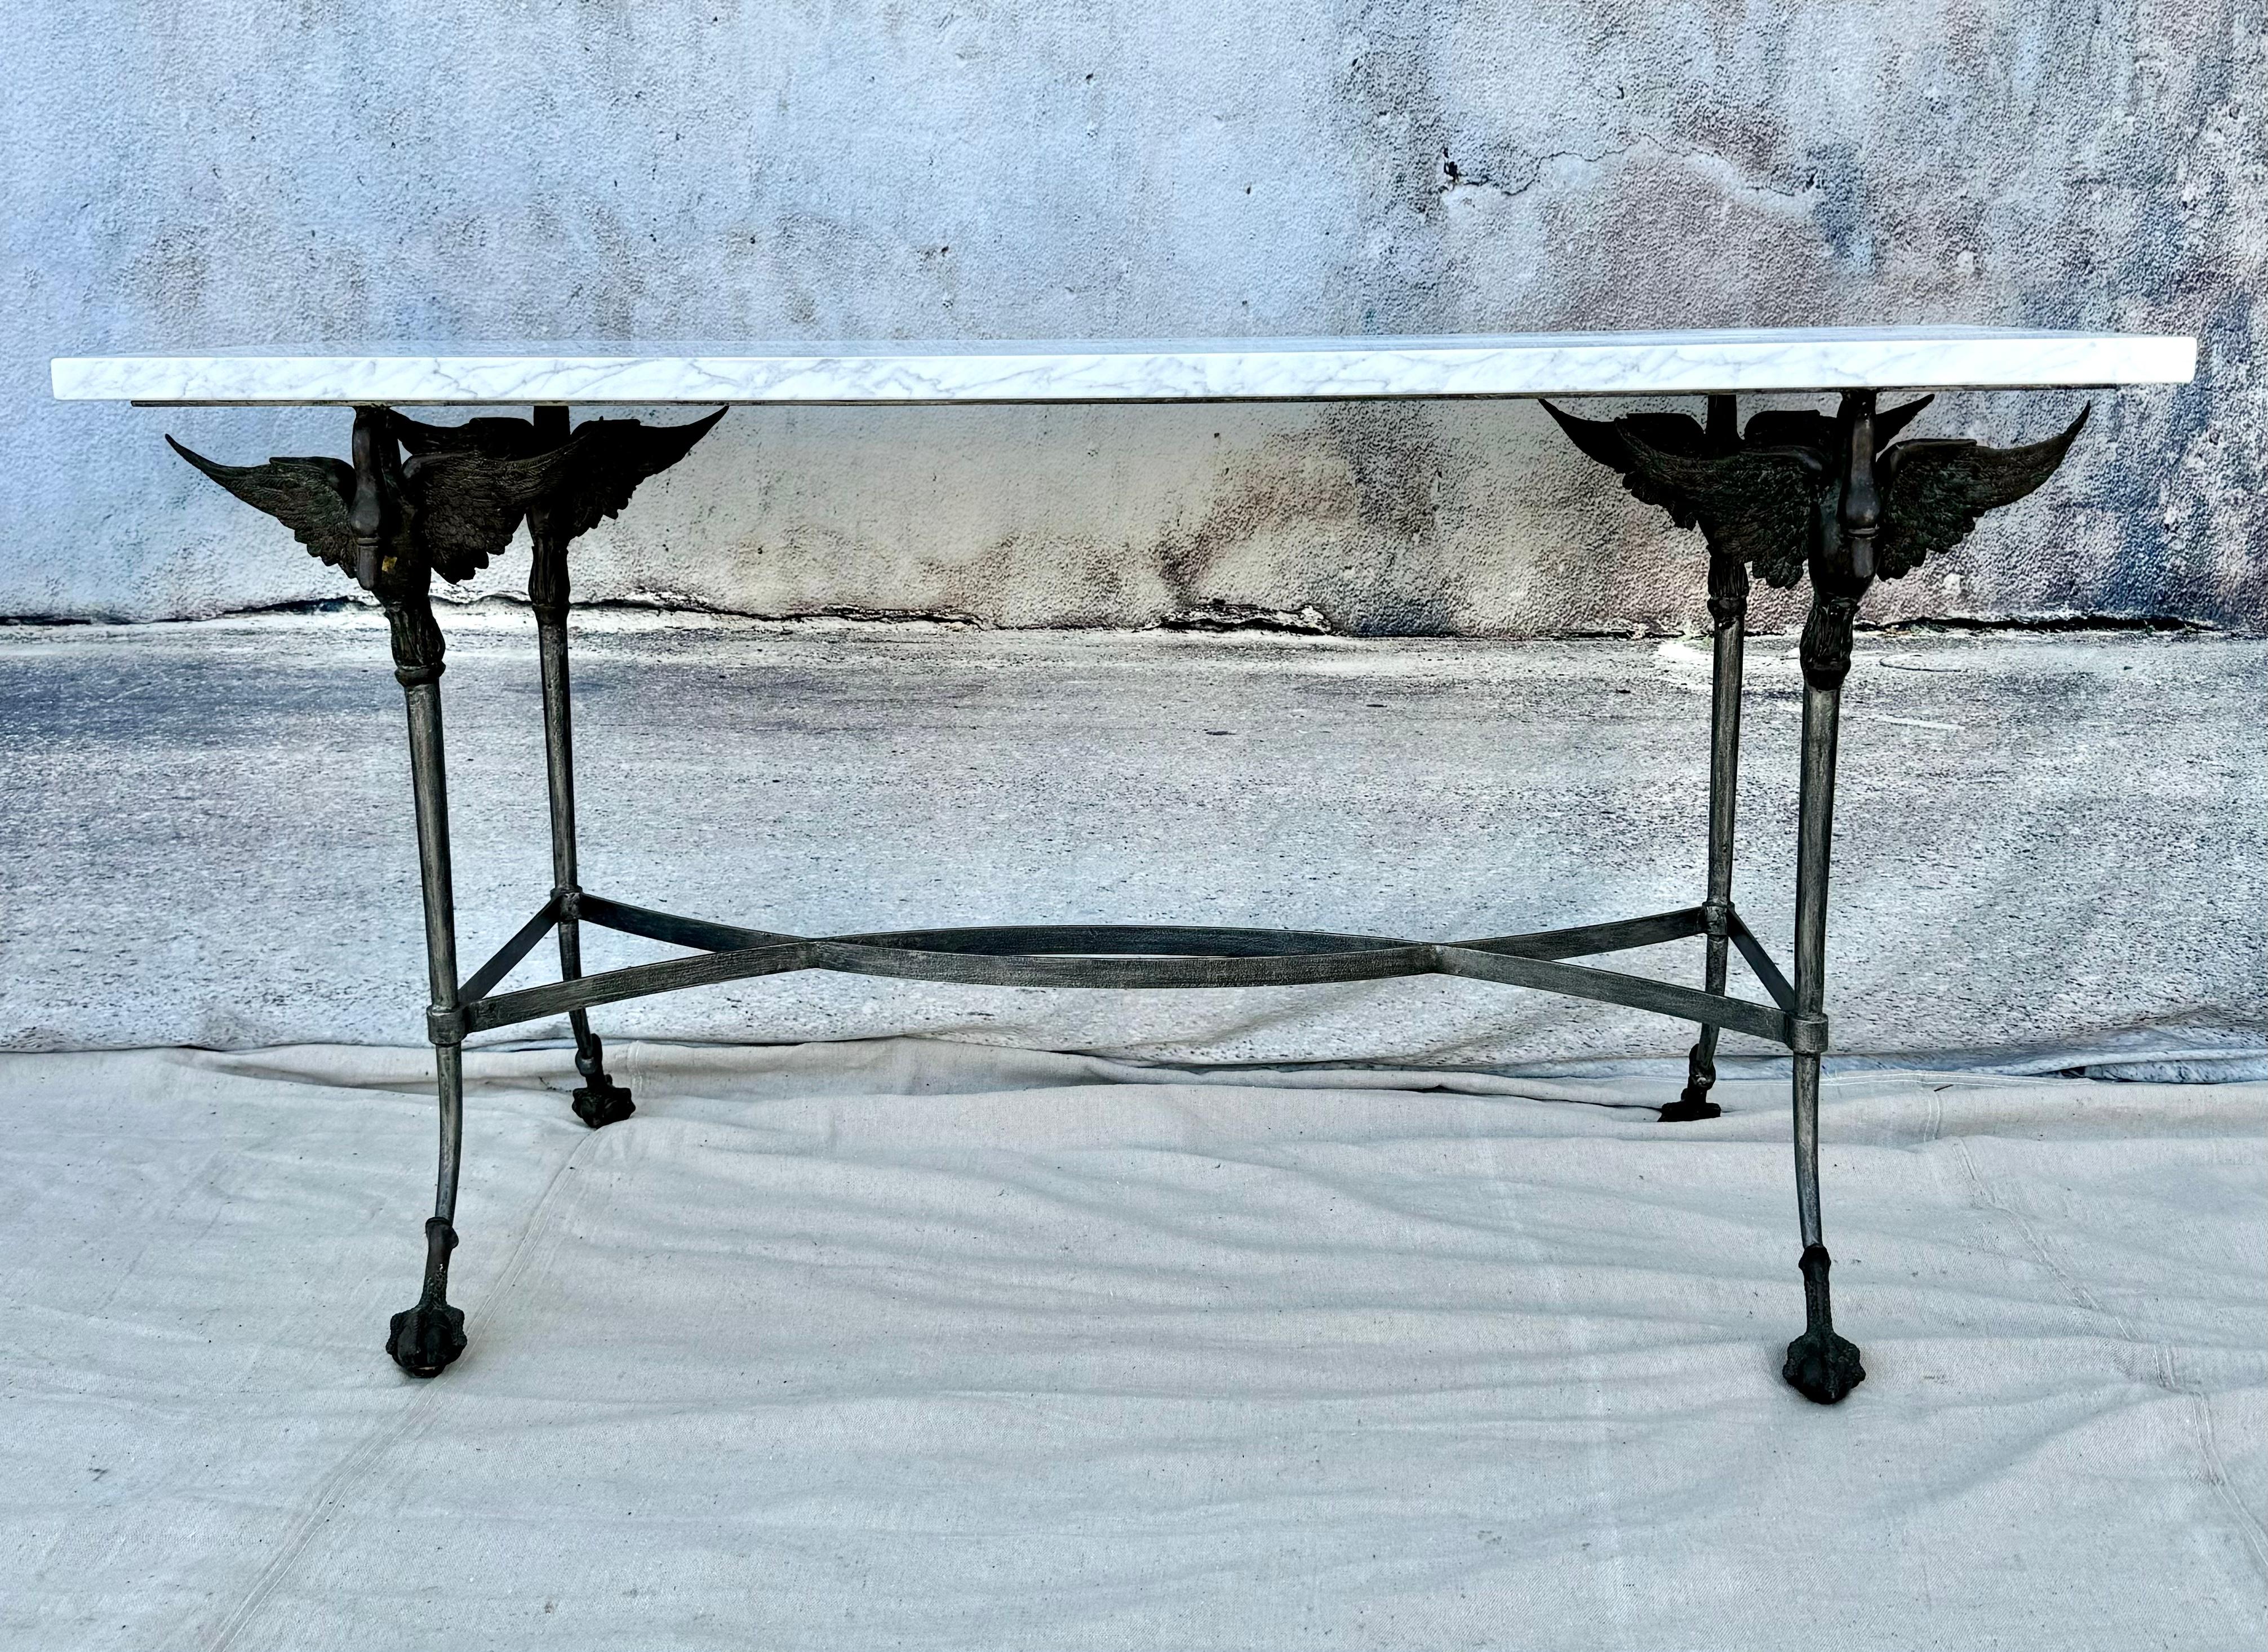 Stunning classically designed unique French polished steel base and marble top table from the 19th century. This table has unique designs with bronze swans on each corner, curved iron legs, culminating in iron swan talons wrapped around ball feet.